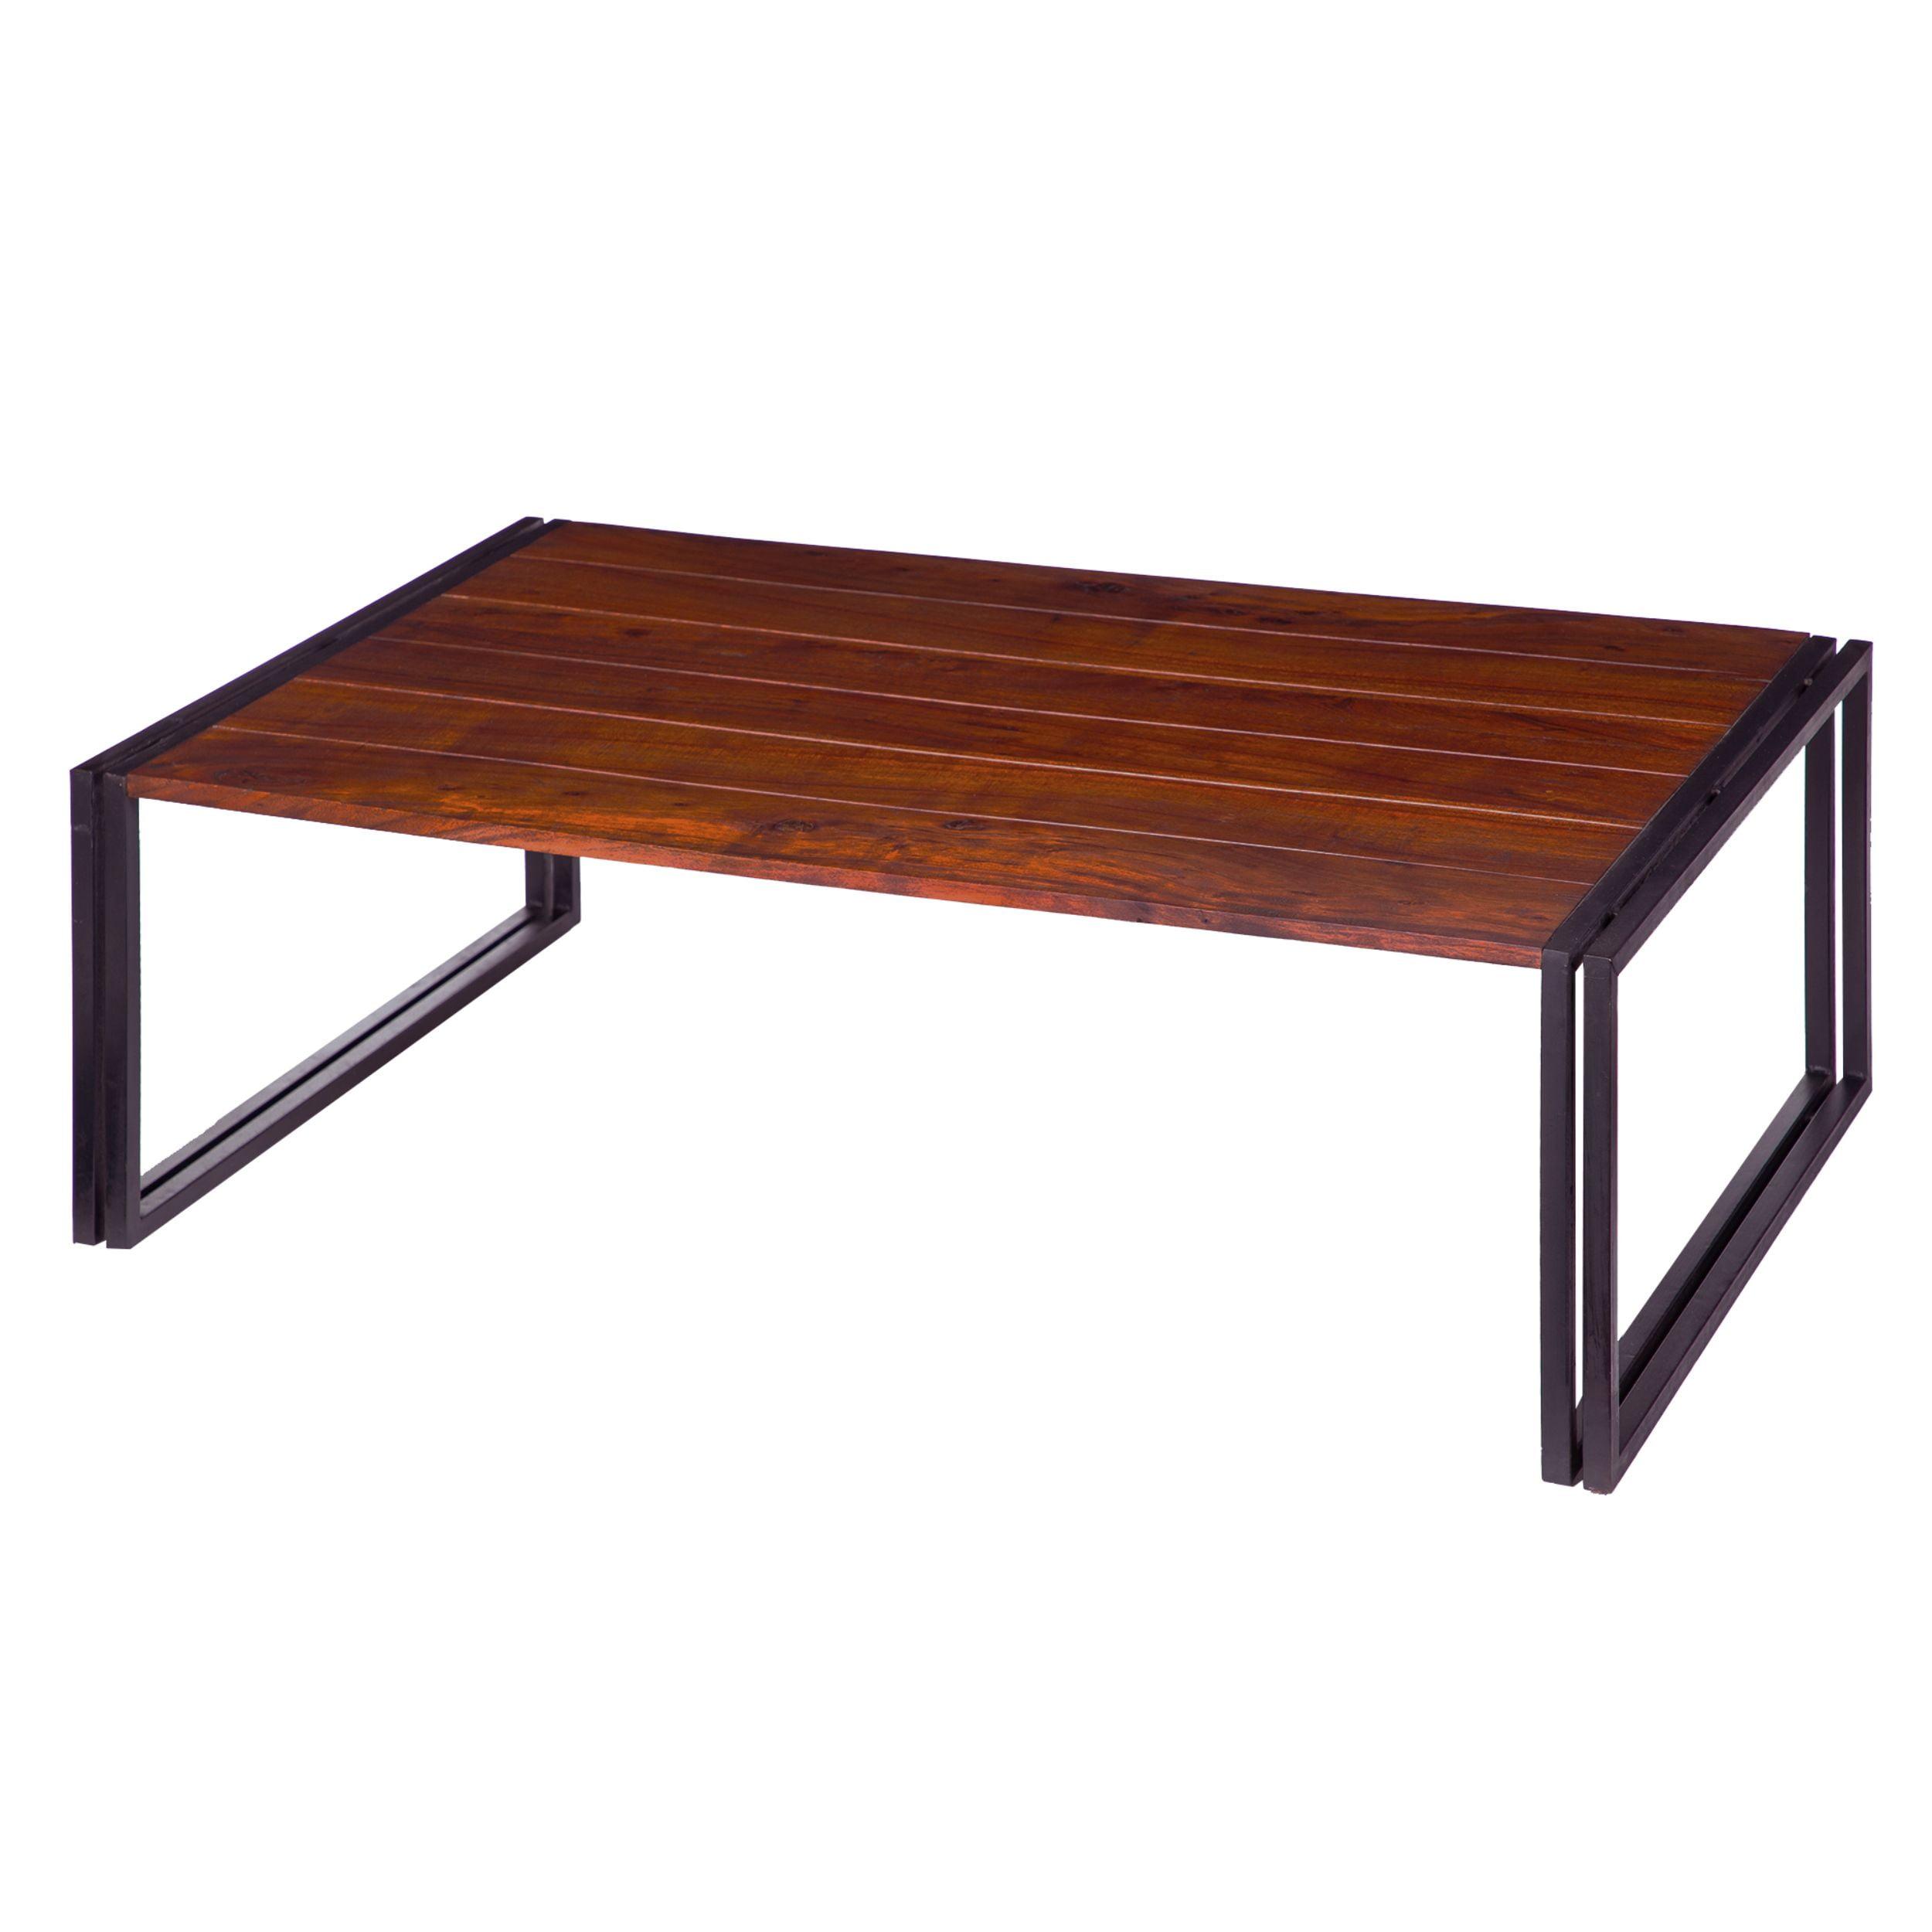 Acacia Wood and Metal 48" Industrial Lift-Top Coffee Table, Brown and Black